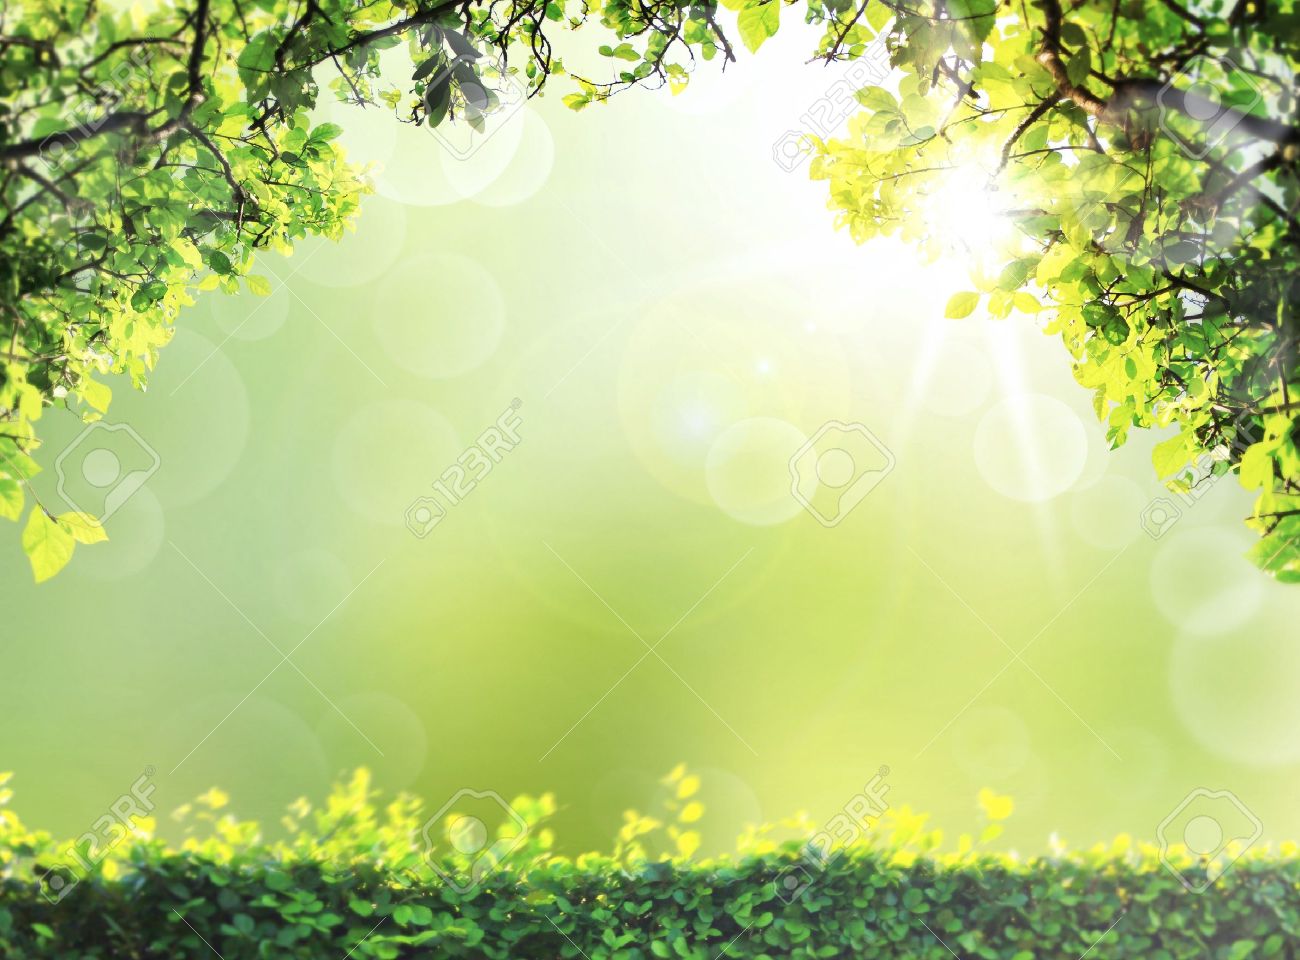 Natural Green Spring Or Summer Season Abstract Nature Background